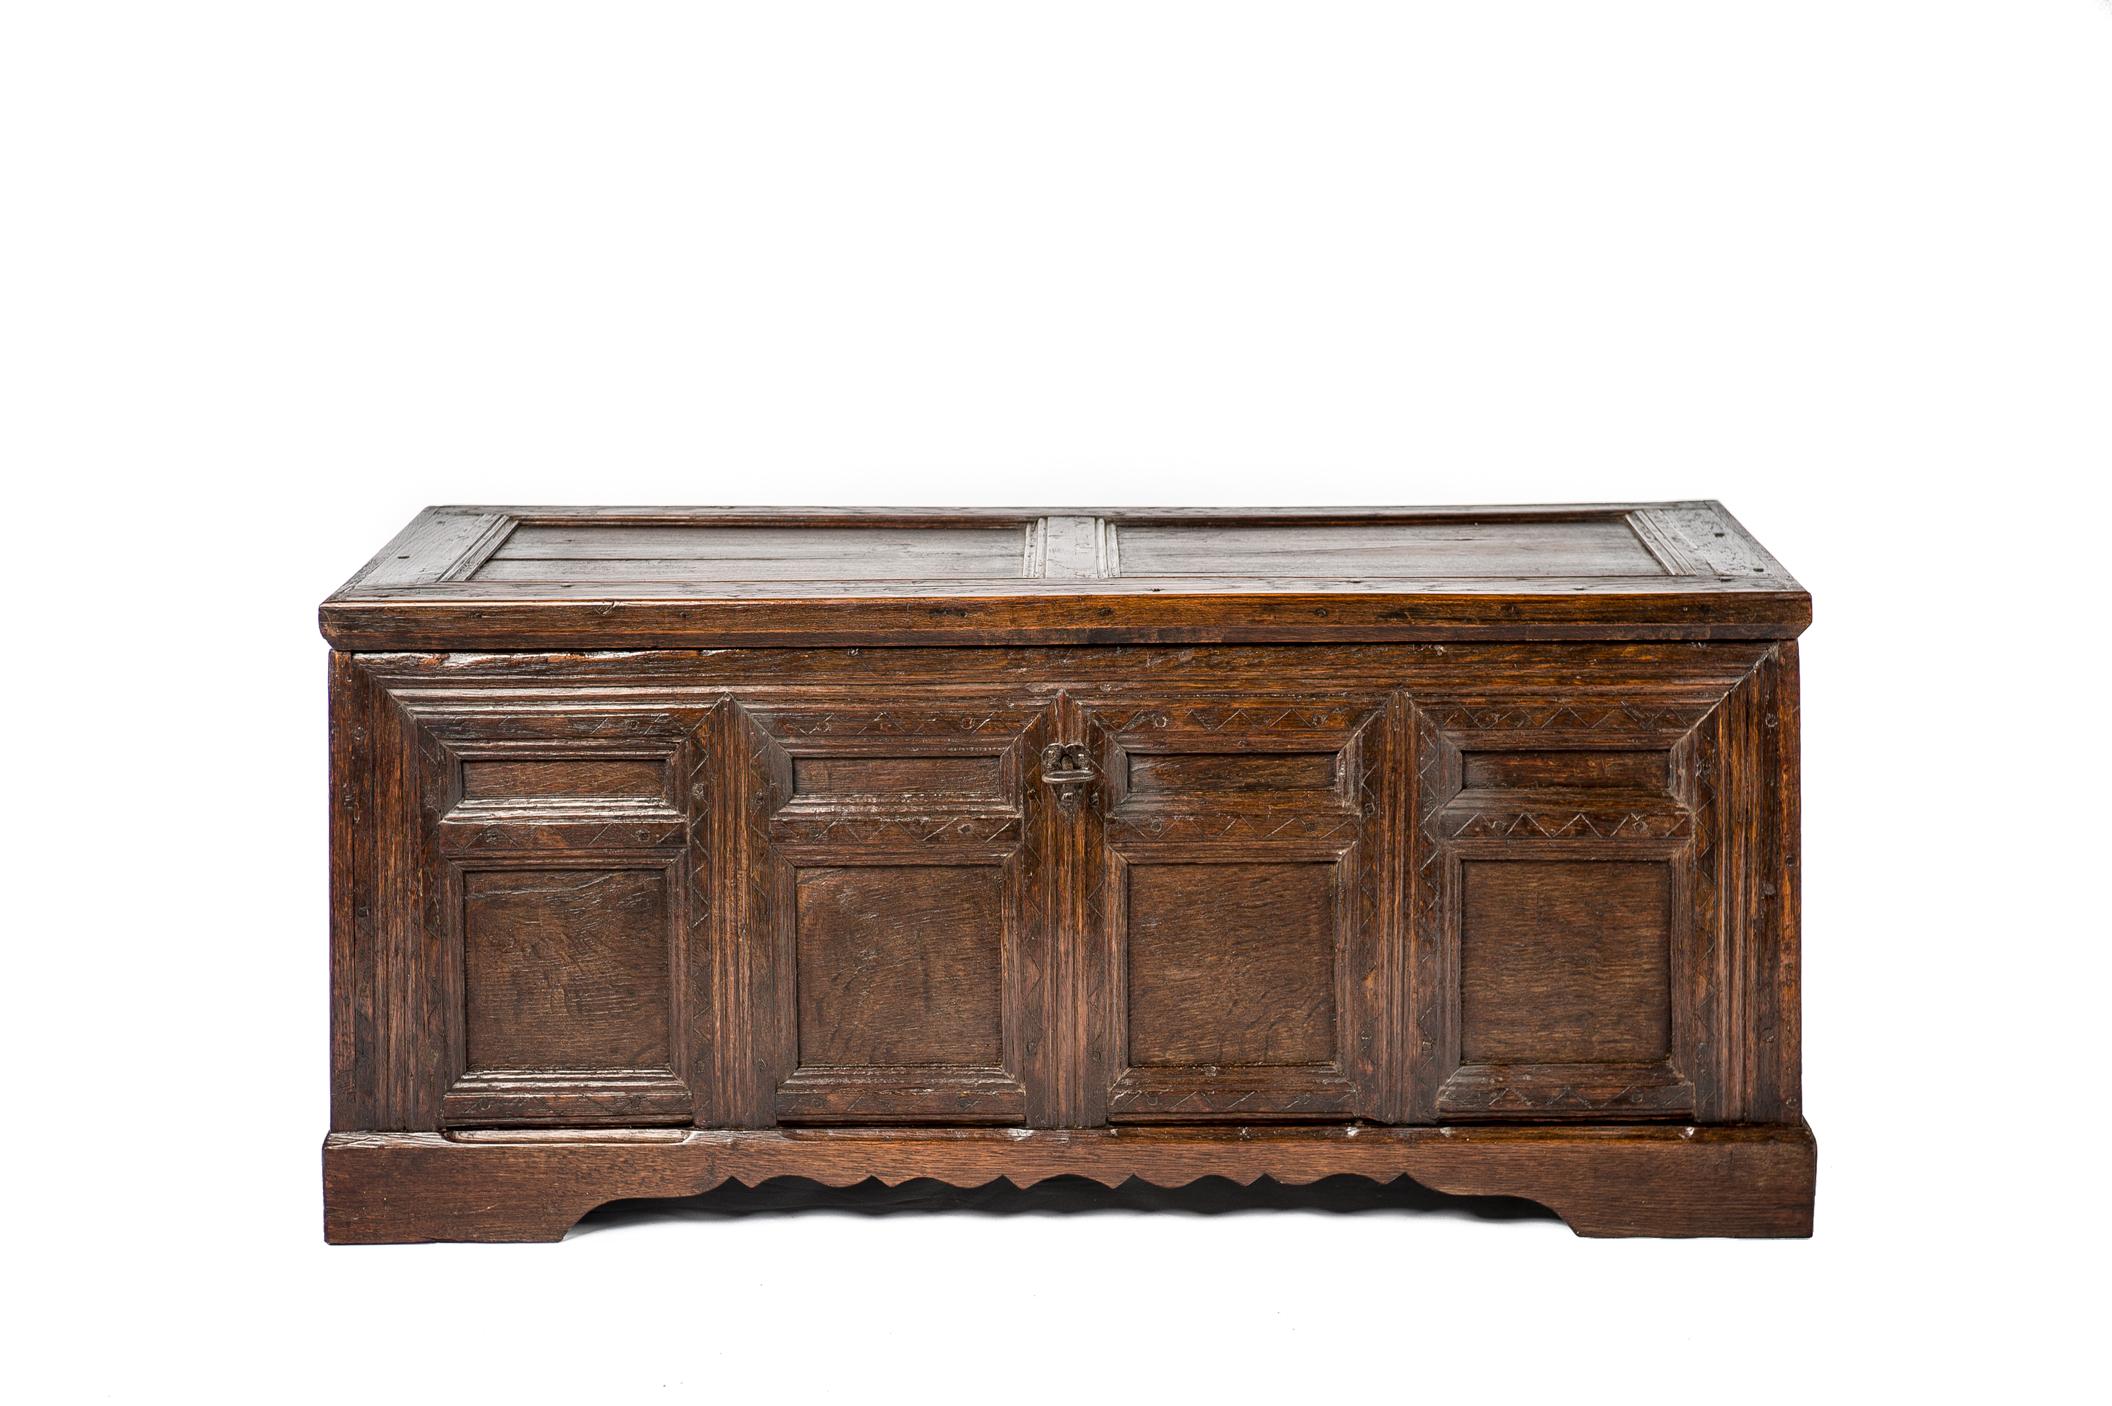 A beautiful antique eight-panel English coffer or trunk, dating to the William III period in the early 1700s. The piece has recessed panels with molded edges around them. The piece is decorated with geometrical carvings on its front. The coffer